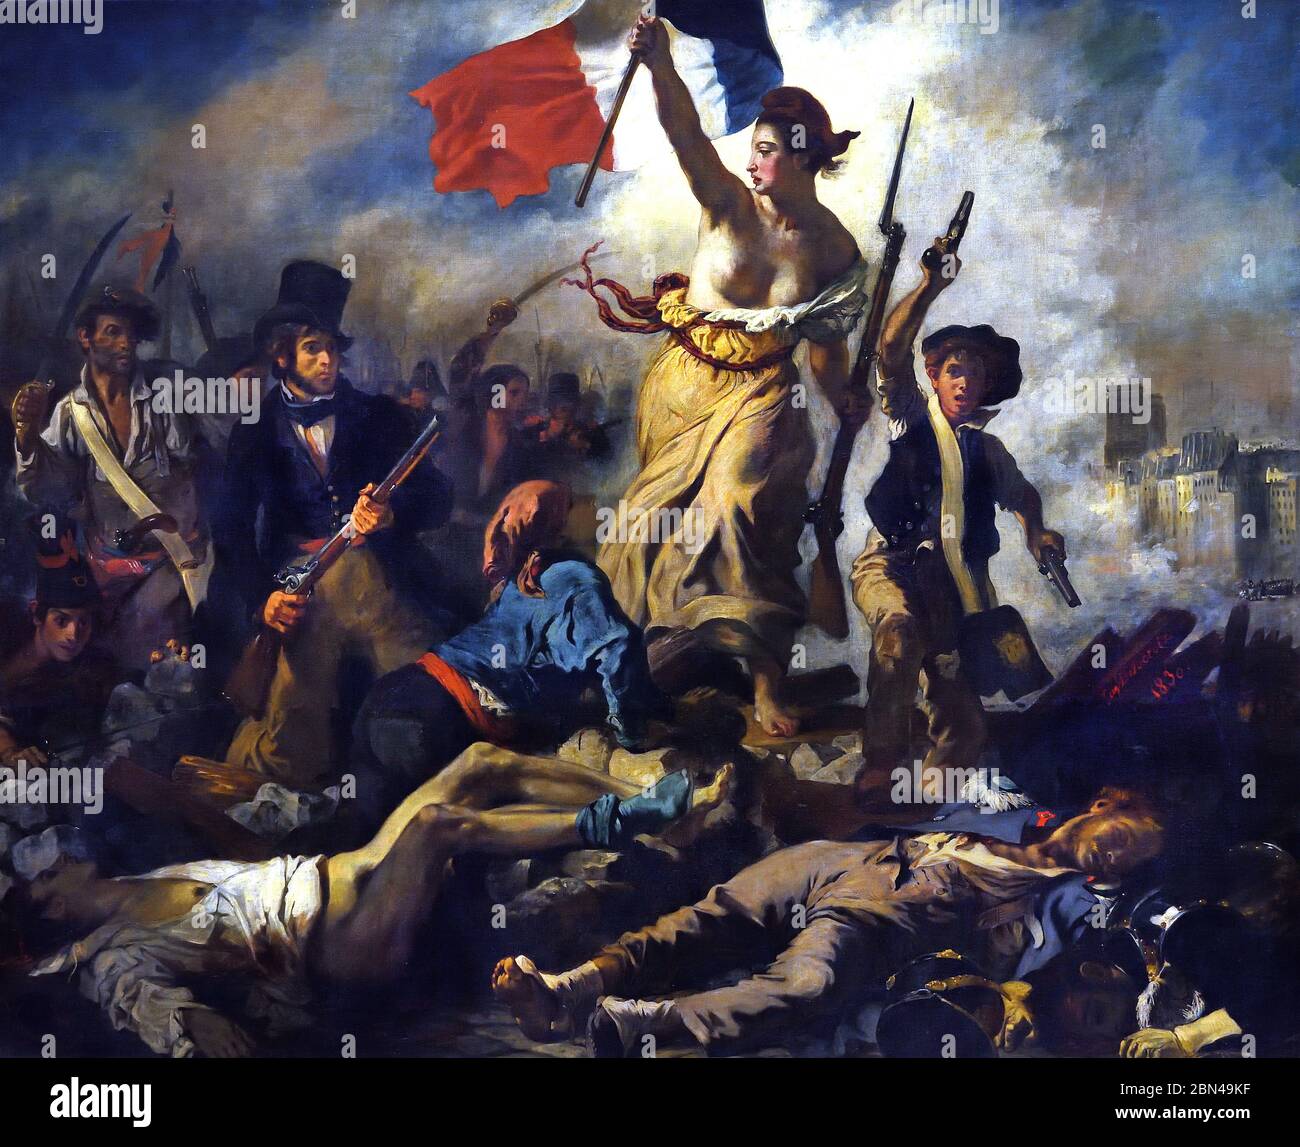 Liberty Leading the People 28 July 1830 Eugène Delacroix 1798 - 1863, France, French, ( July Revolution of 1830, which toppled King Charles X of France. A woman of the people with a Phrygian cap personifying the concept of Liberty leads a varied group of people forward over a barricade and the bodies of the fallen, holding the flag of the French Revolution  ) Stock Photo